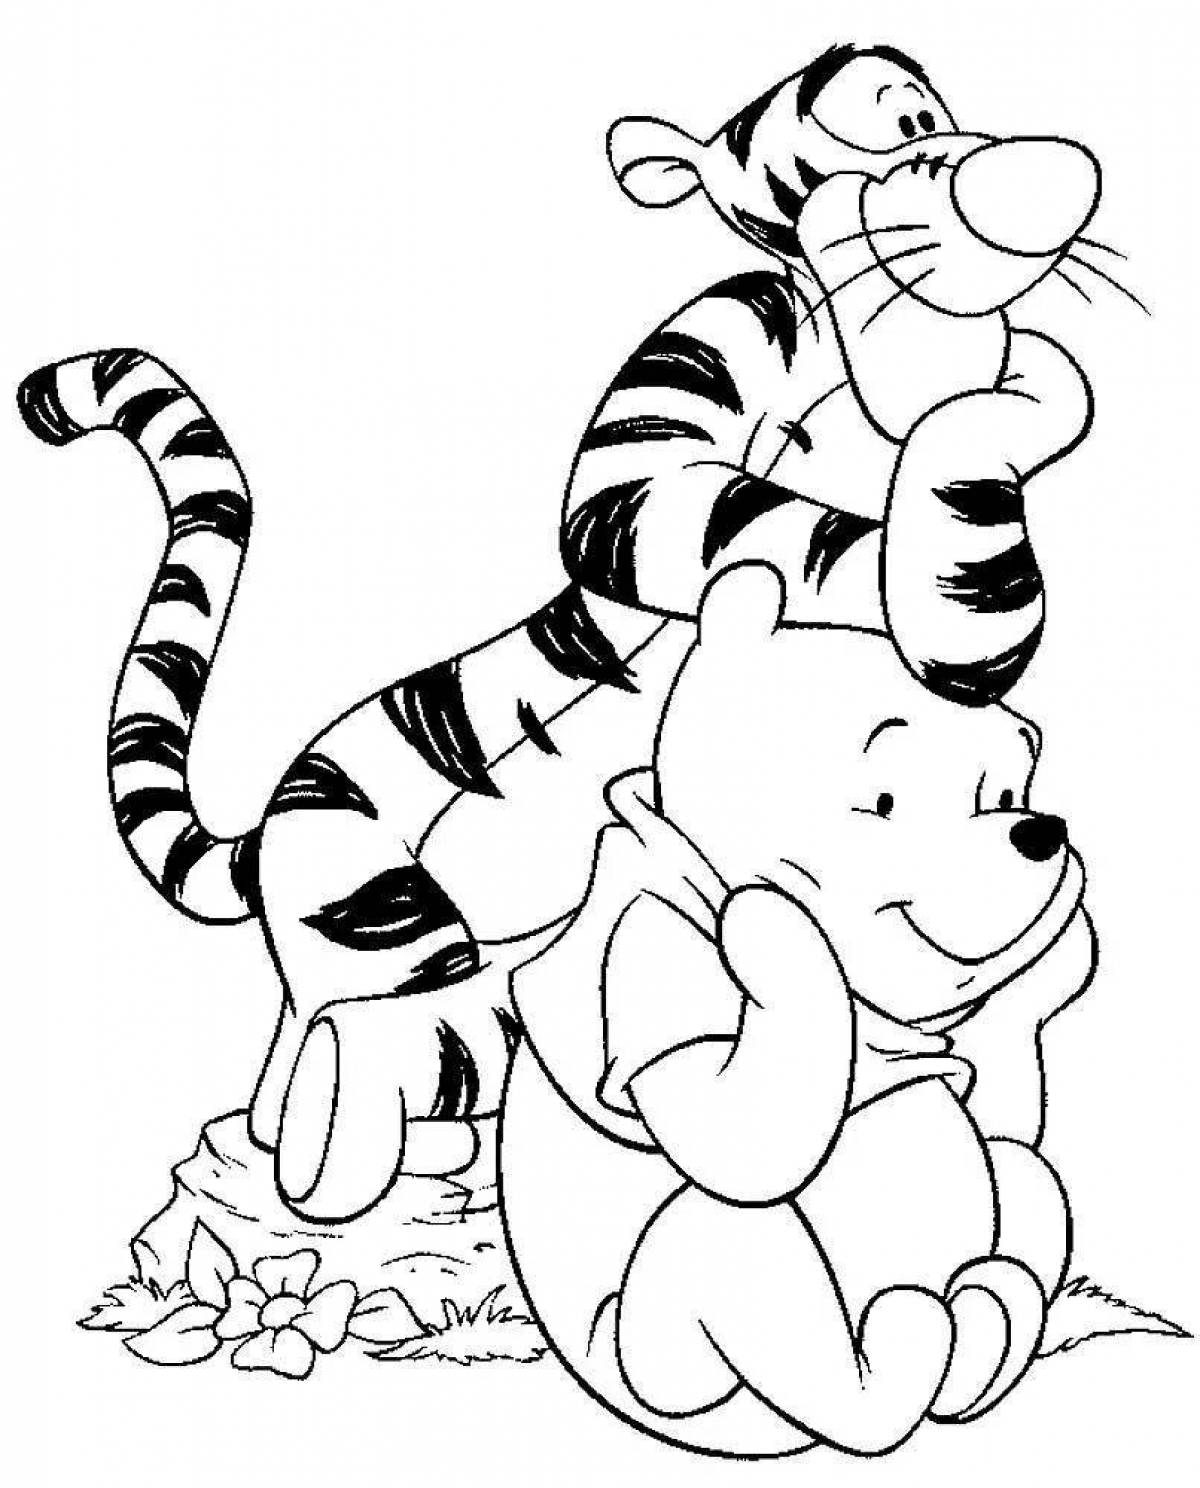 Colored funny coloring book for kids